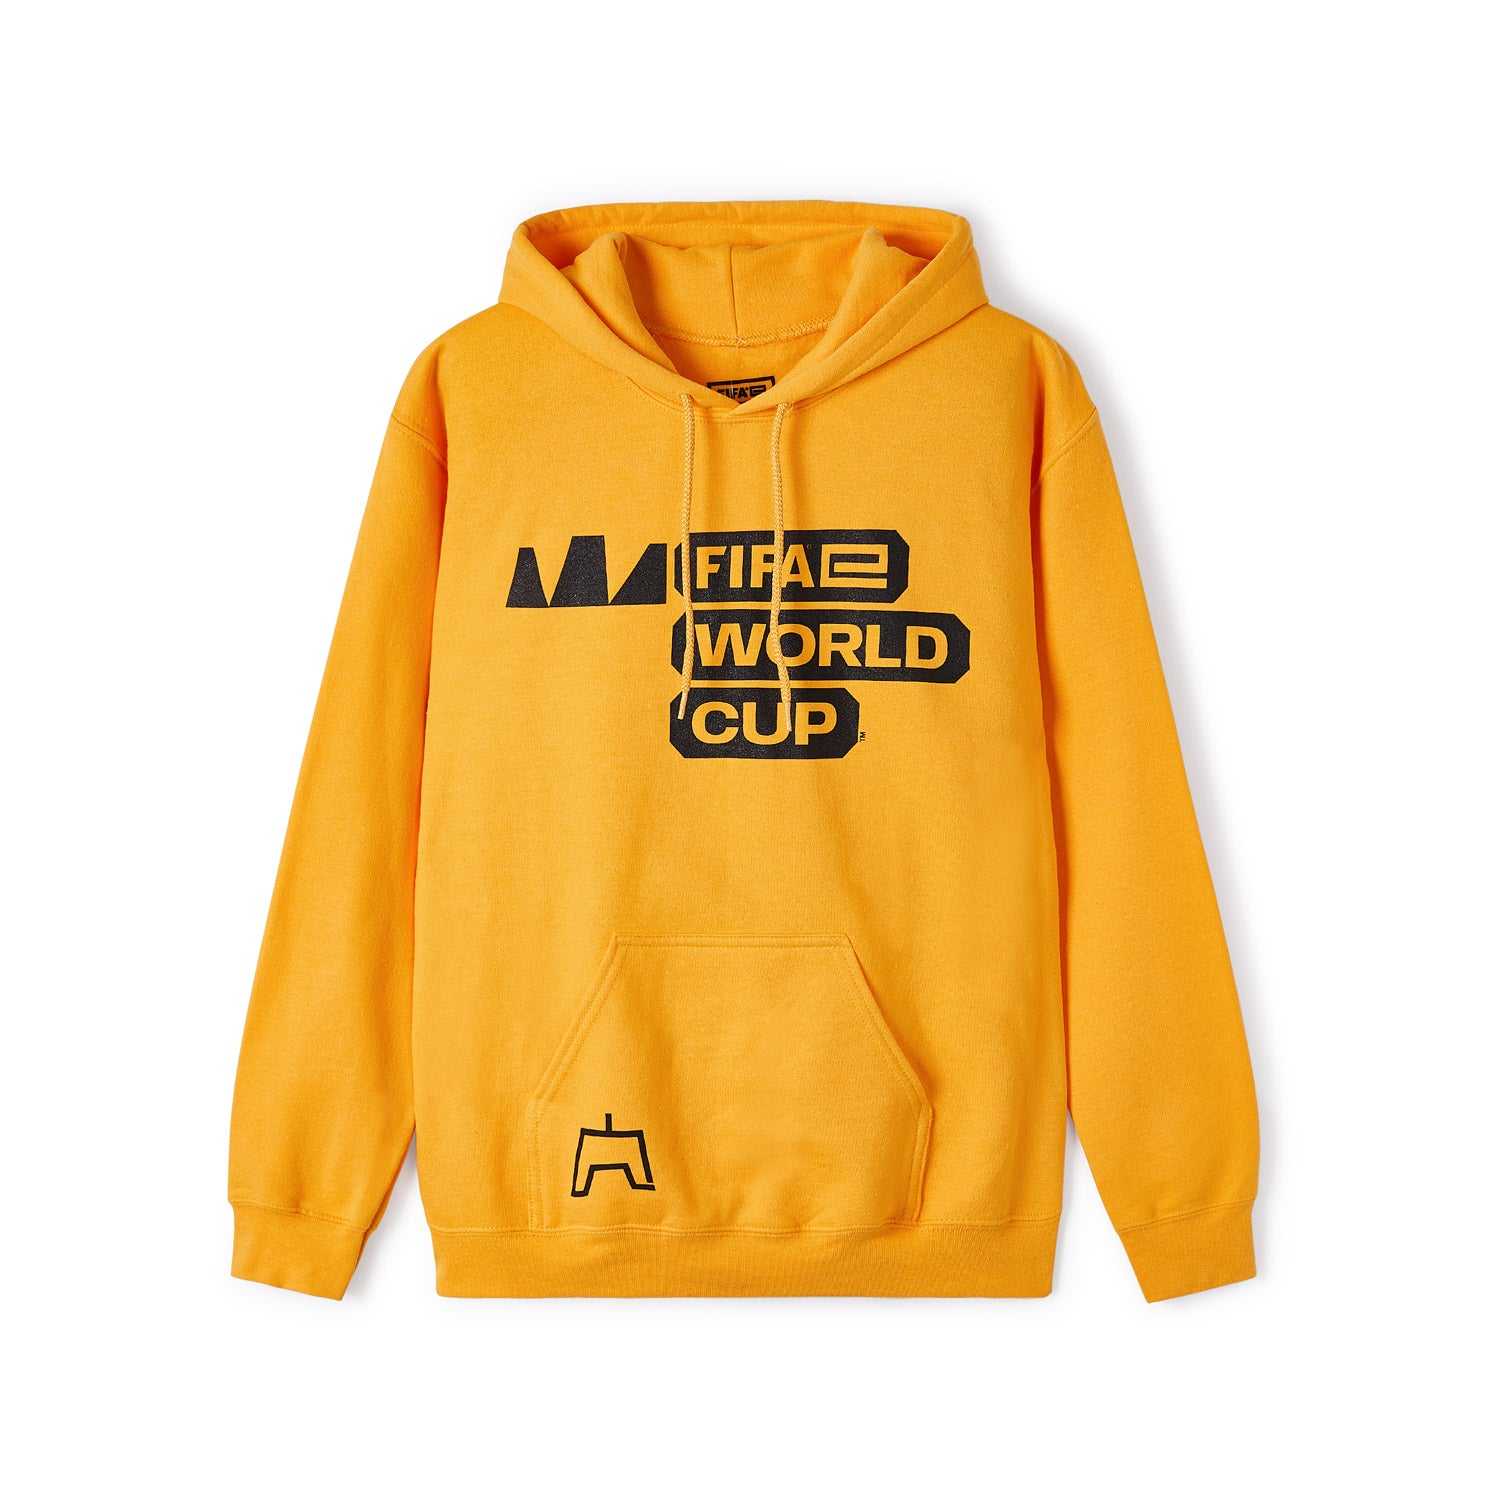 FIFAe World Cup 2022 Hoodie Yellow - Mens